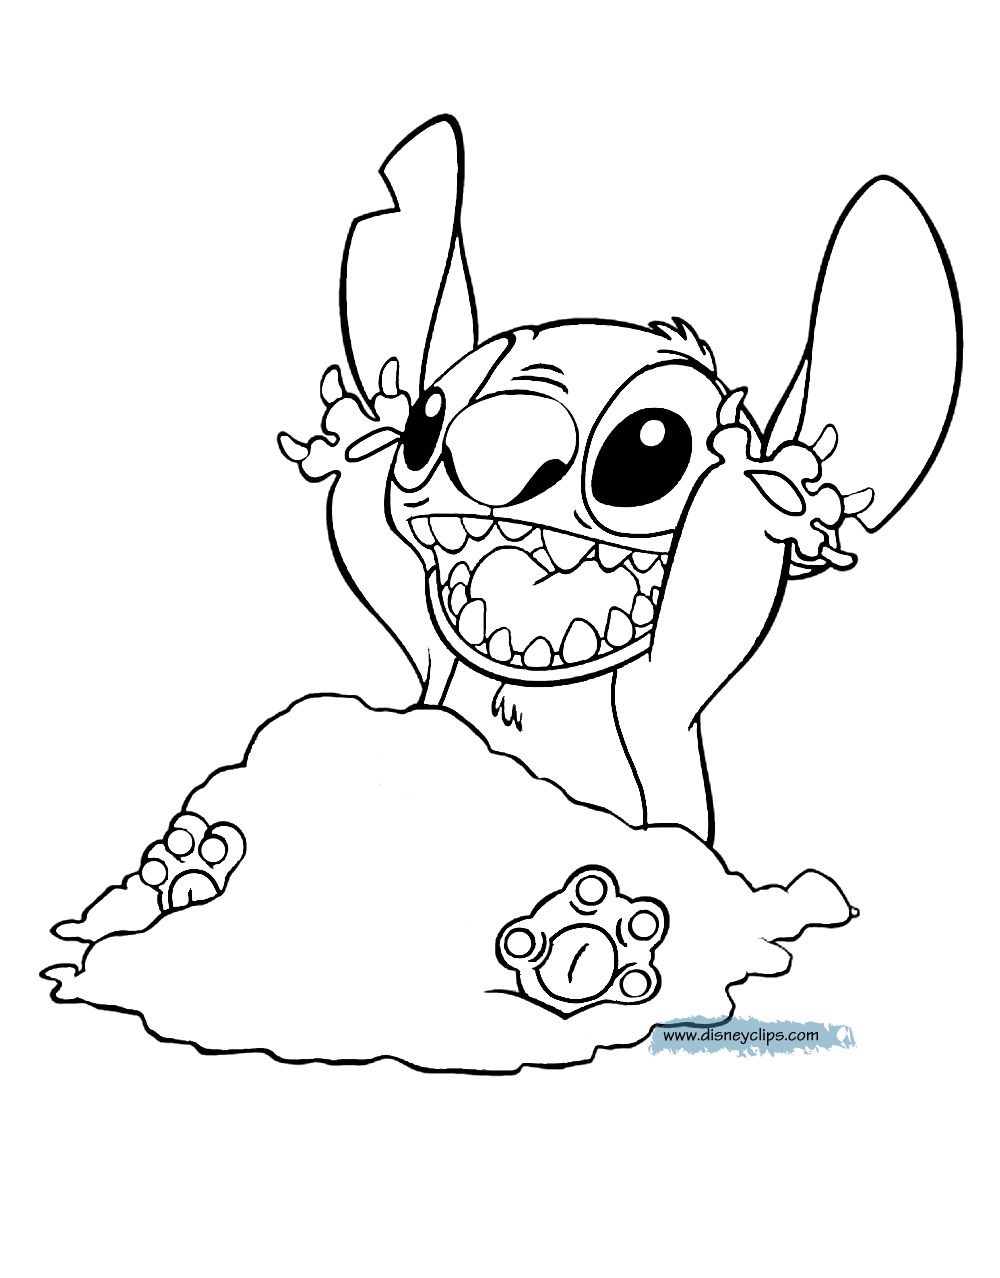 Lilo and Stitch Coloring Pages 21   Disneyclips.com